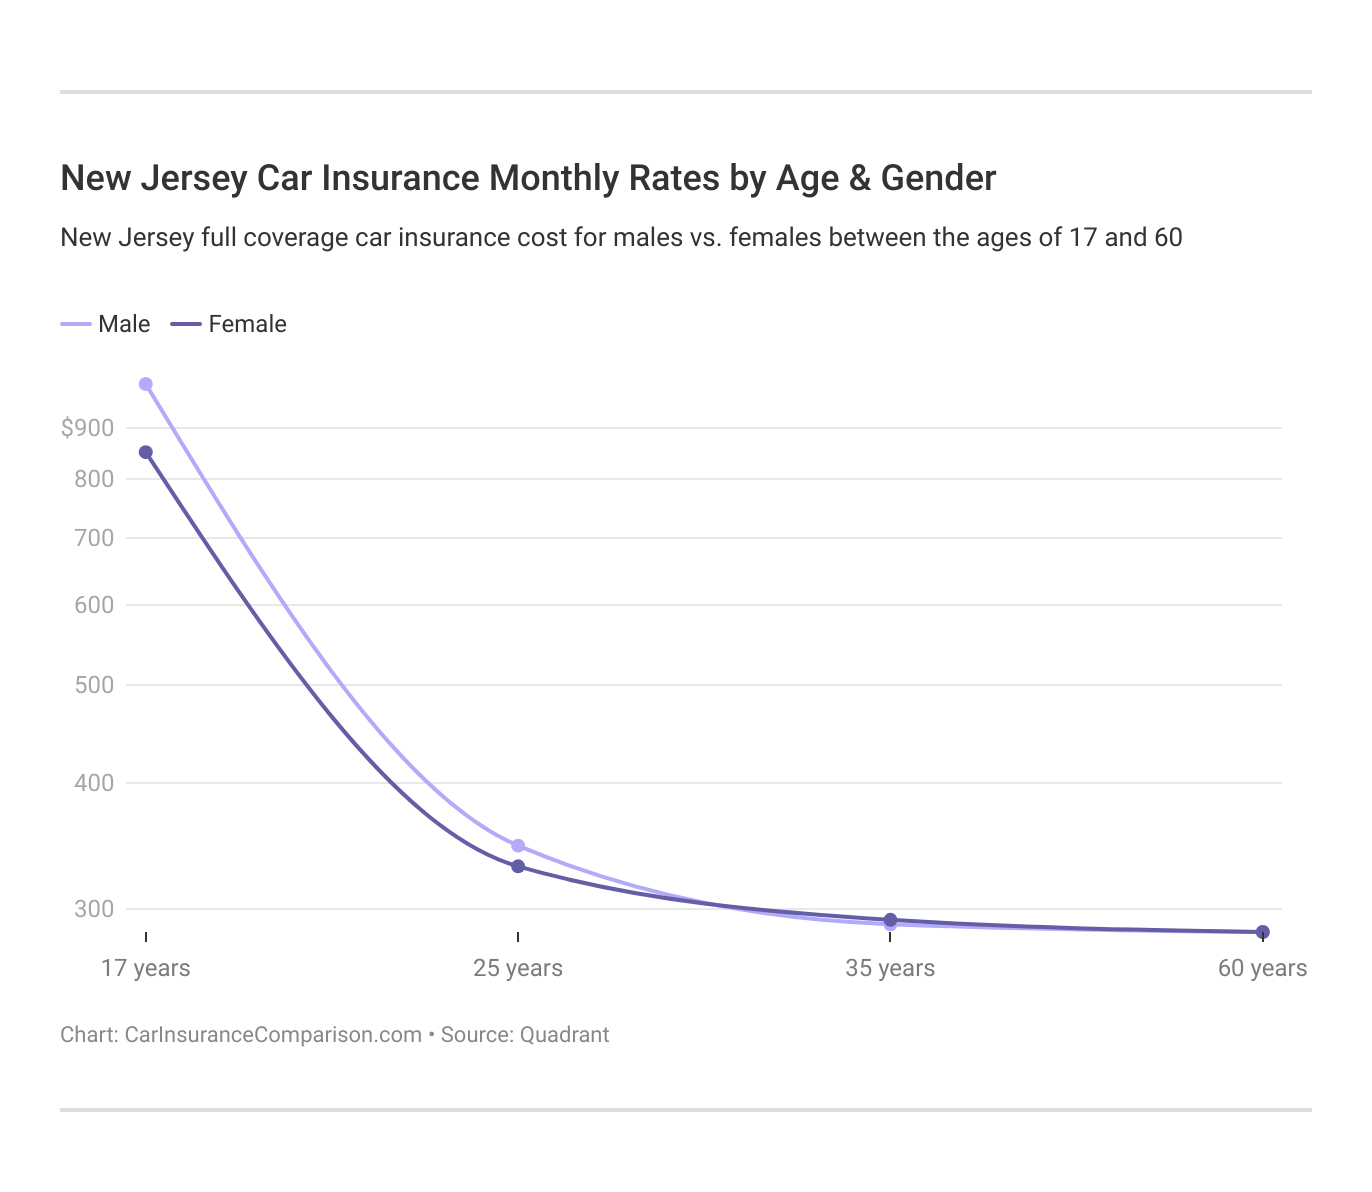 New Jersey Car Insurance Monthly Rates by Age & Gender